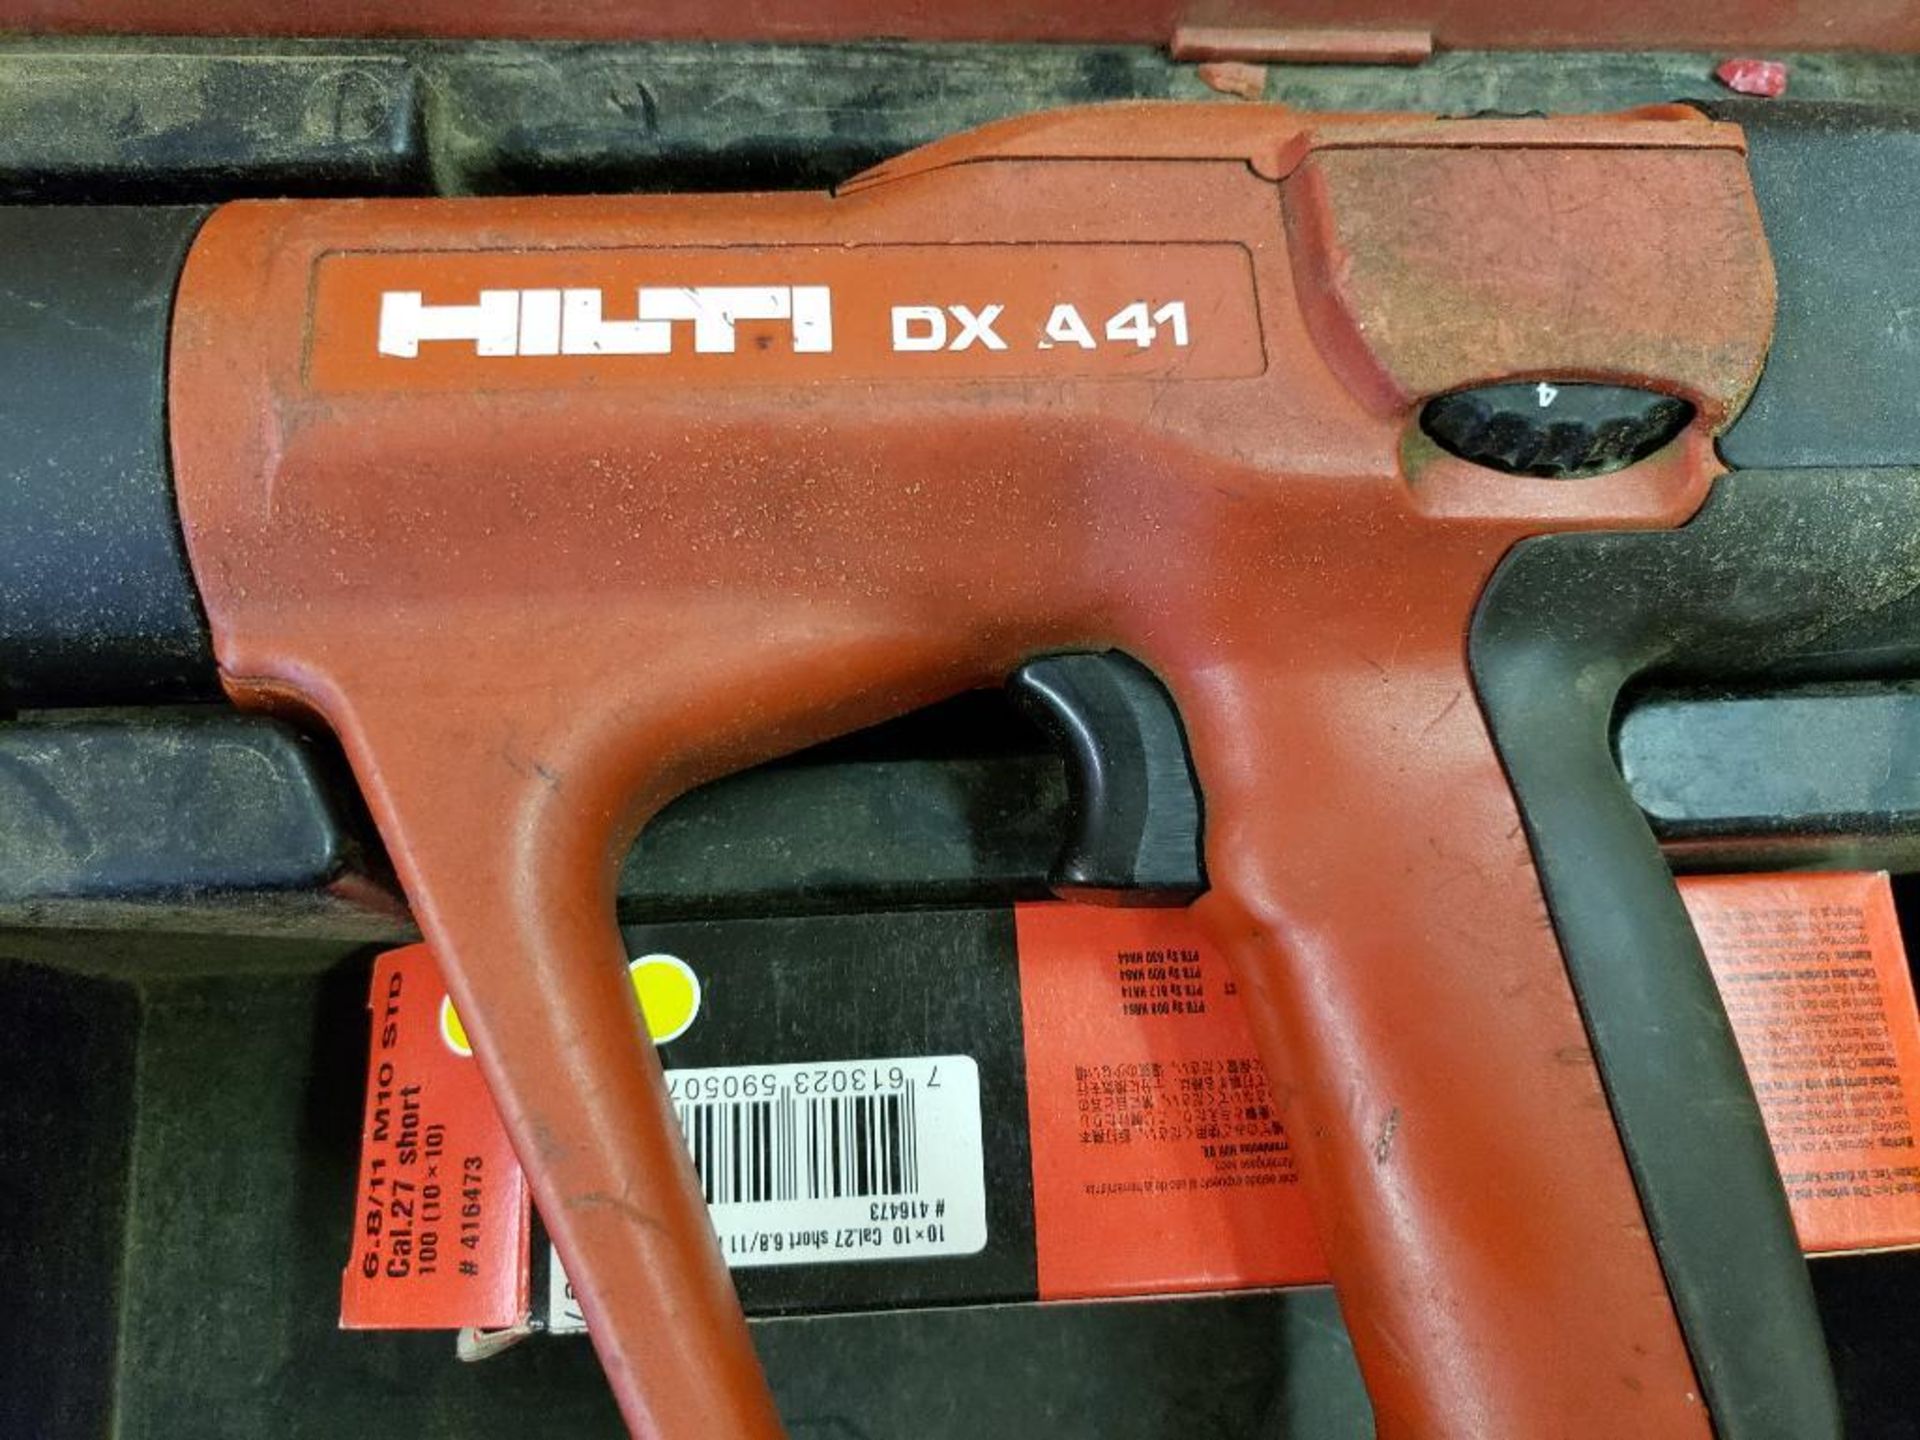 Hilti DXA41 powder actuated tool, with MX72 magazine. - Image 2 of 9